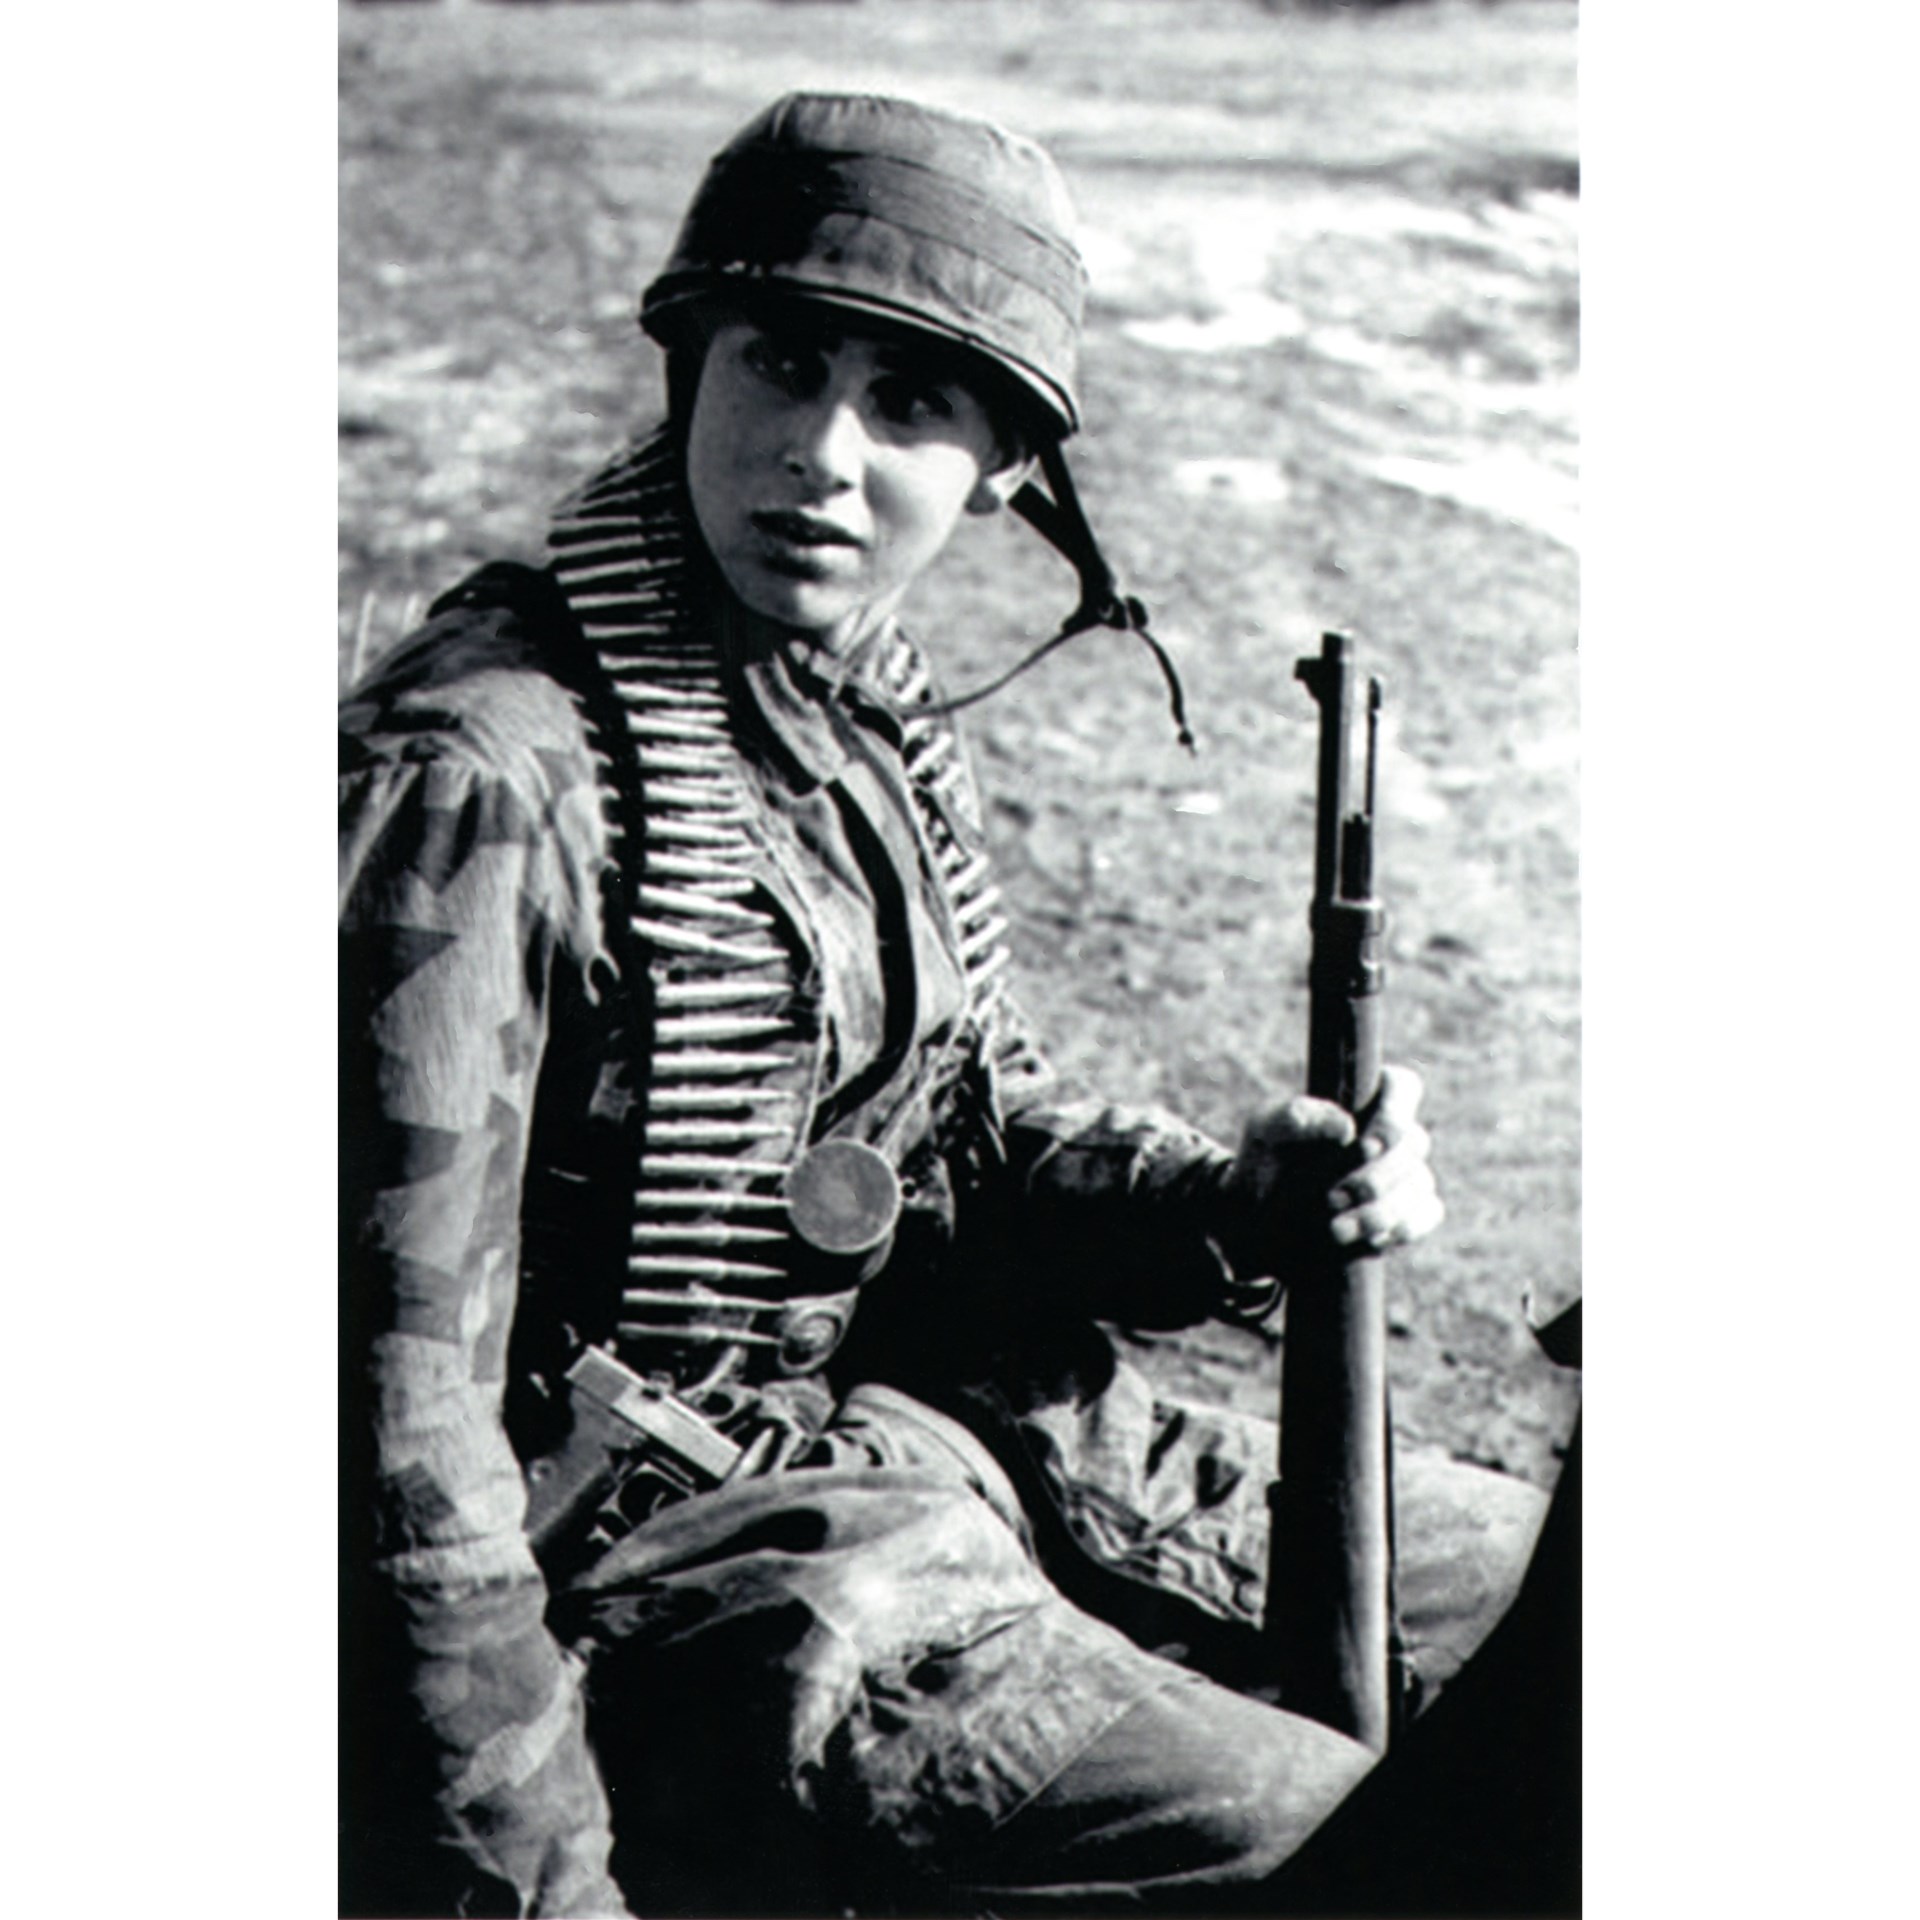 A heavily-armed young paratrooper on the Gran Sasso raid. He carries a Kar 98k Mauser rifle (7.92mm) and a Walther P-38 pistol (9mm), along with a belt of 7.92mm ammunition for his squad’s MG34 or MG42—normally, the squad carried about 1,800 rounds of ammo between them to support the MG as their base of fire. Note that he also carries the Stielhandgranate 24. Author’s collection